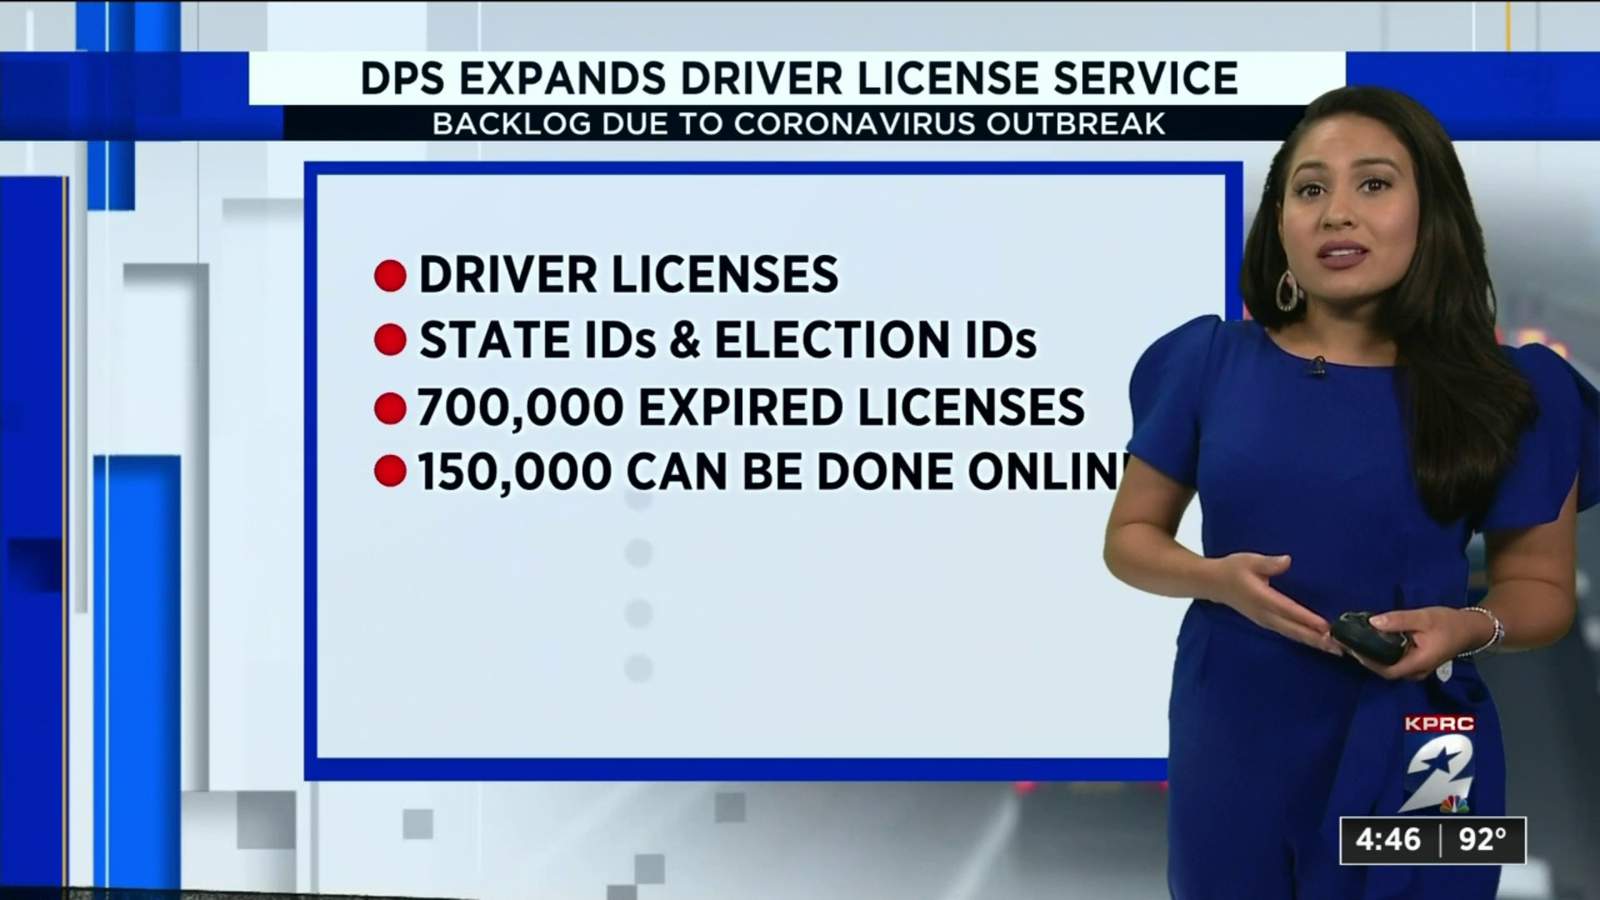 DPS now offering limited reopening of driver license offices. Here’s what you should know